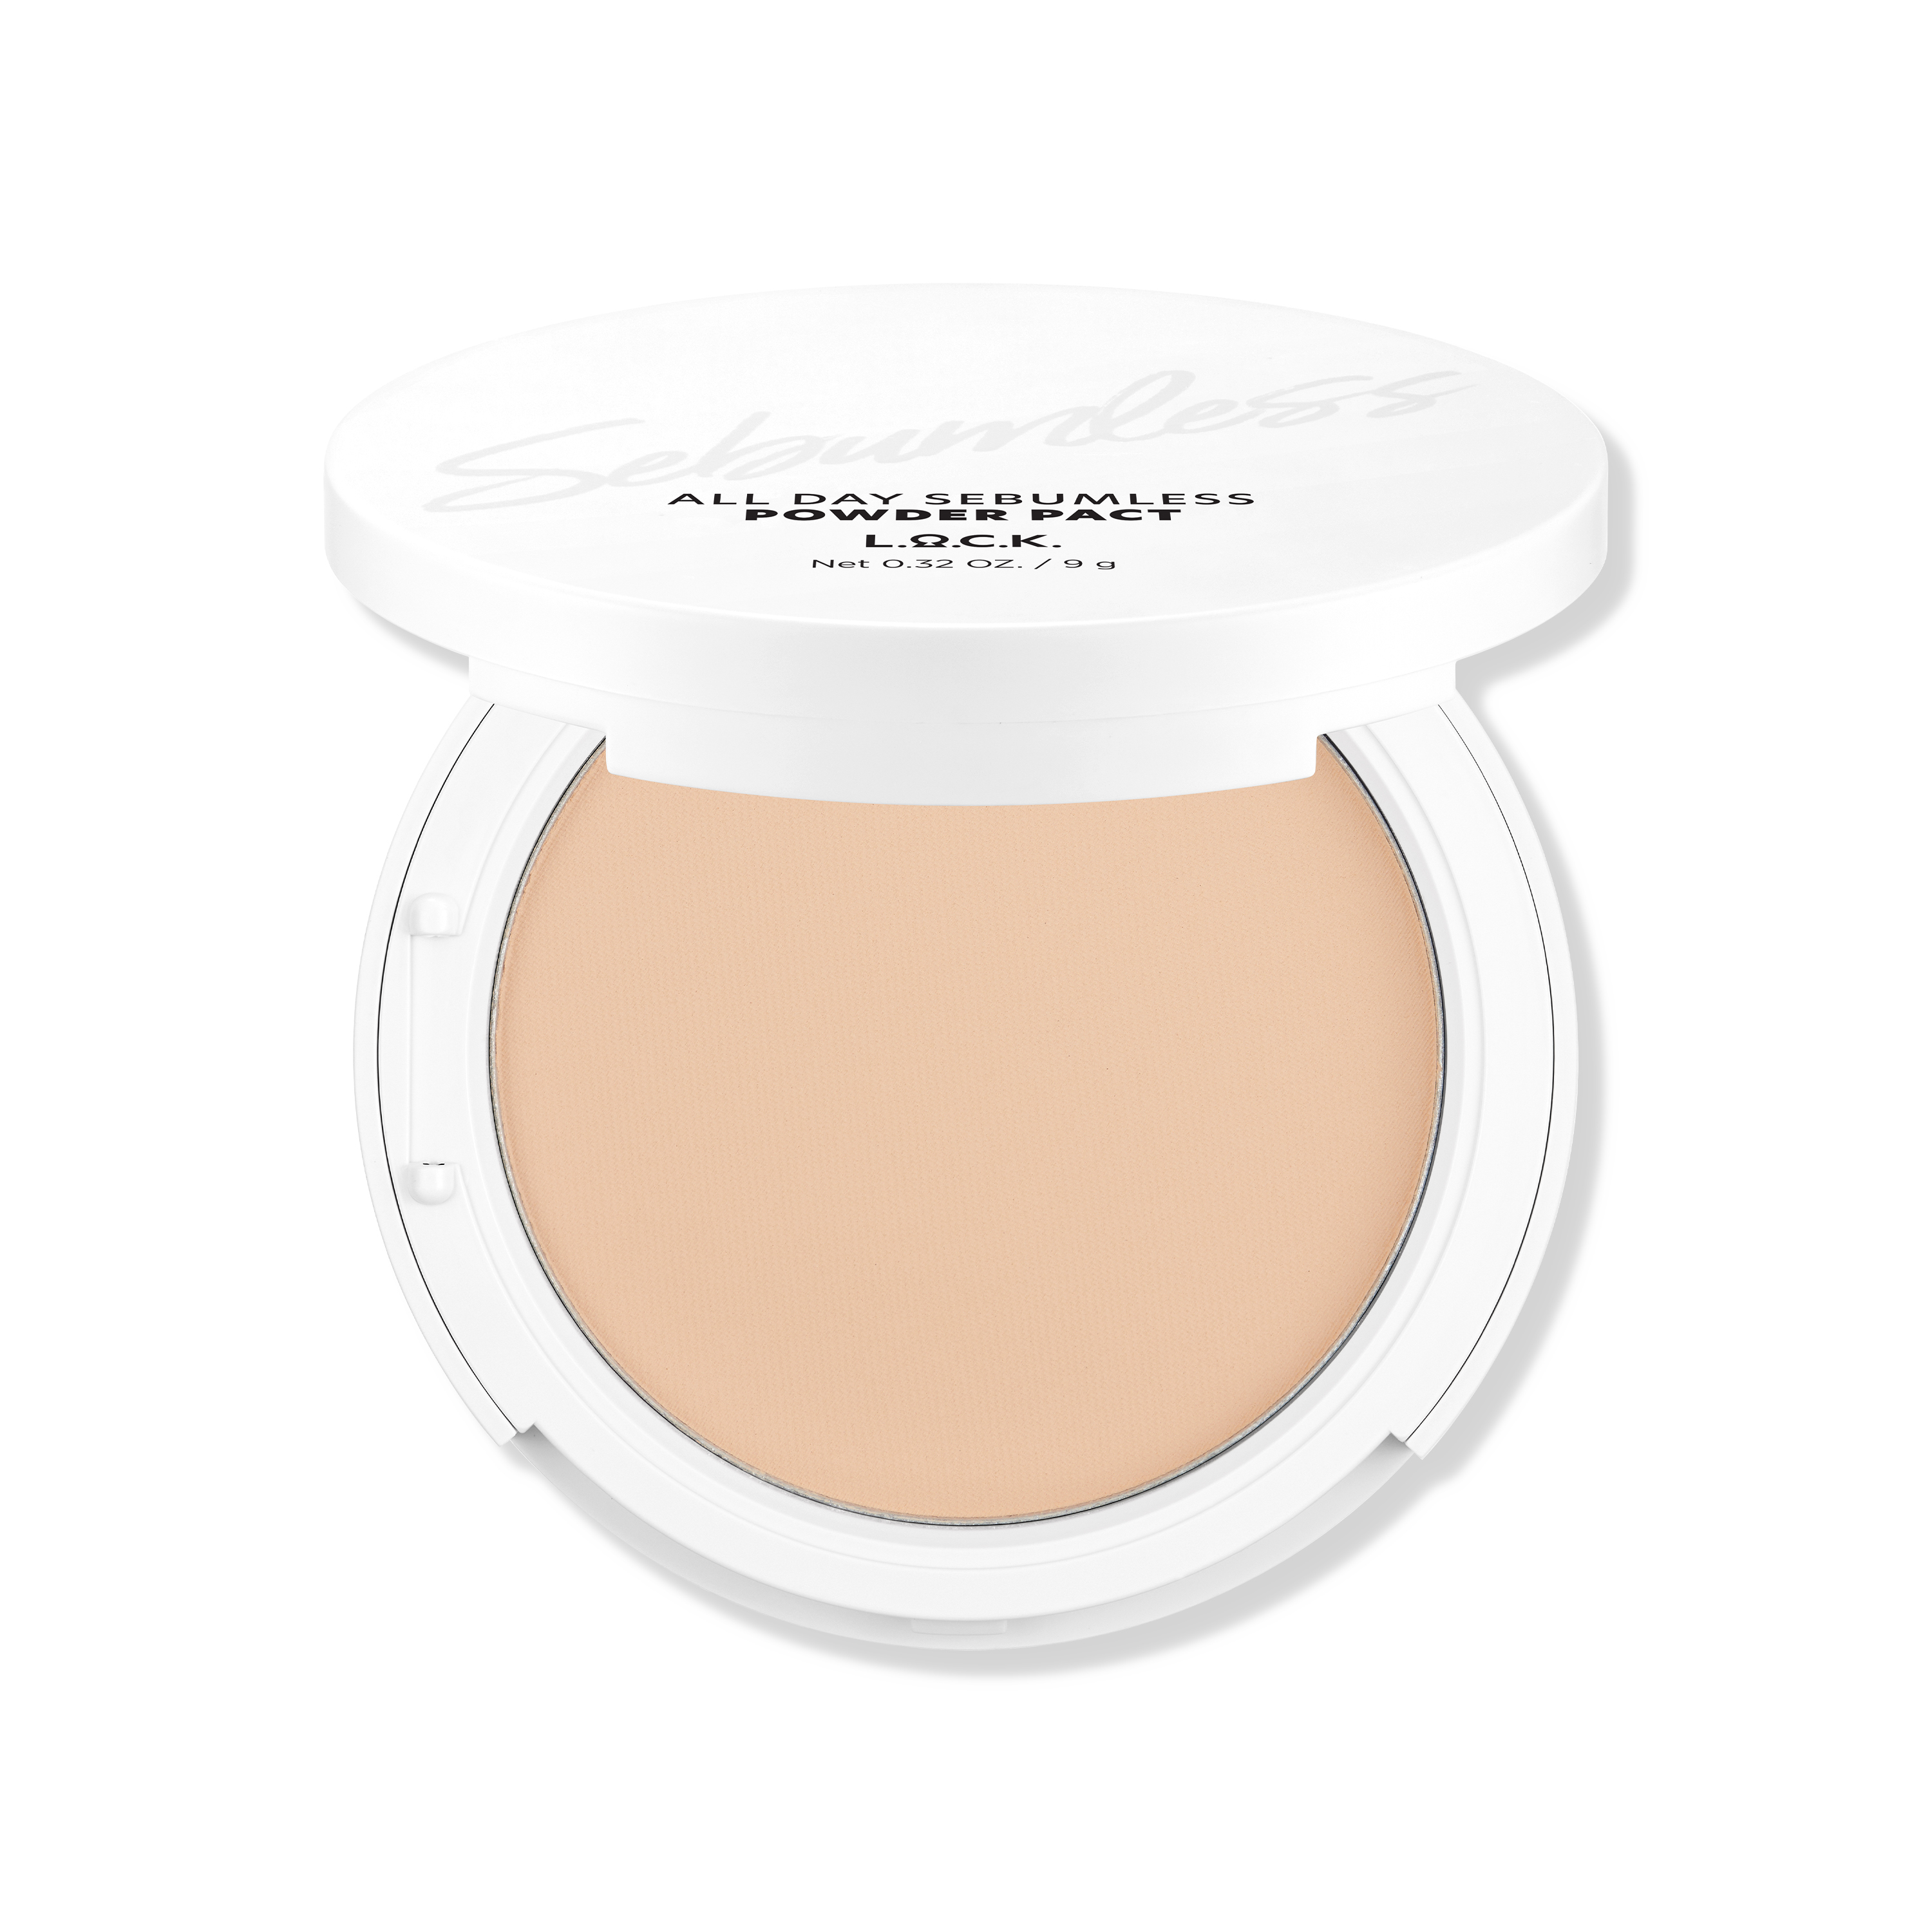 Logisk sagsøger madras ALL DAY SEBUMLESS POWDER PACT | L.O.C.K. COLOR!:: FUN FEARLESS BEAUTY::K  beauty,Make up